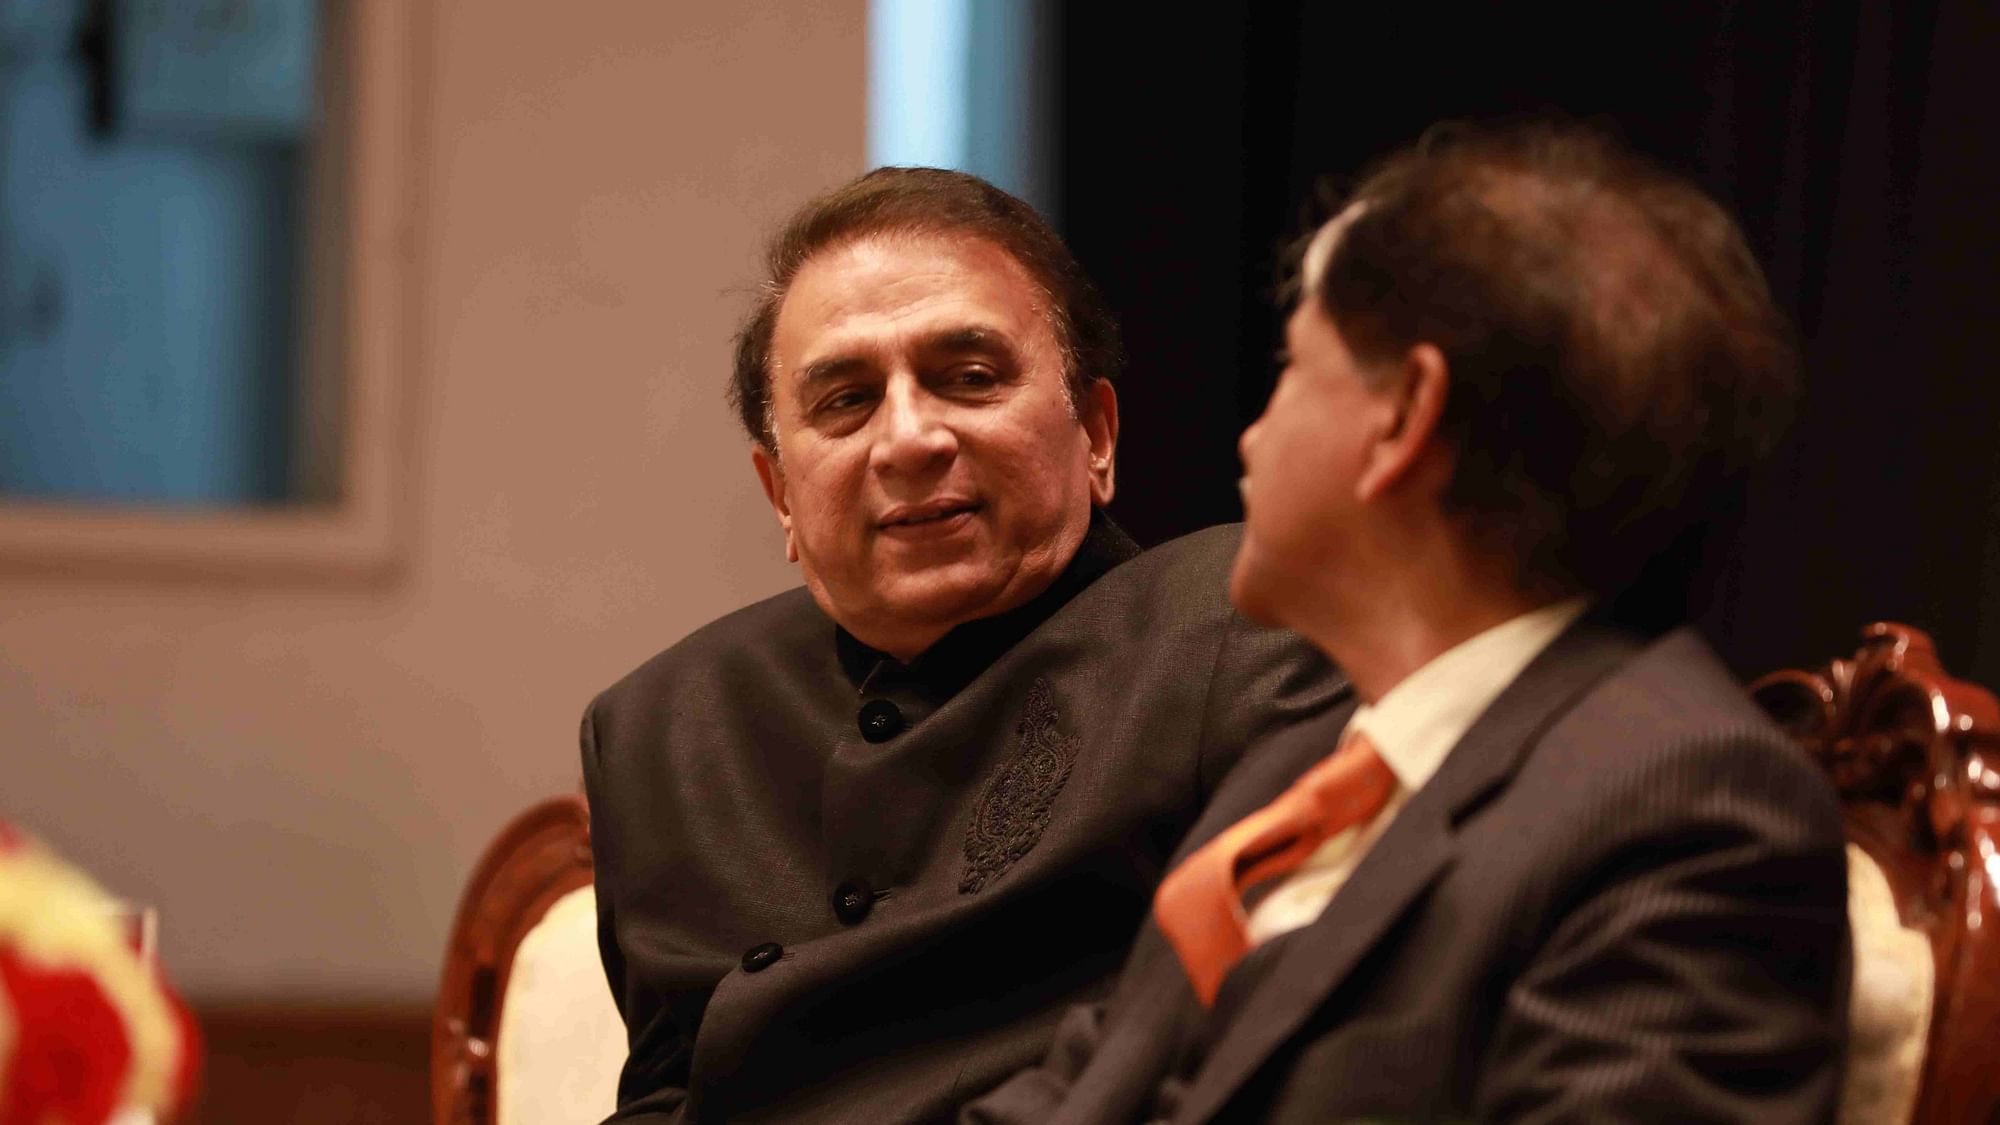 Sunil Gavaskar was speaking at the 26th Lal Bahadur Shastri Memorial Lecture on “changing times of Indian cricket” in New Delhi.